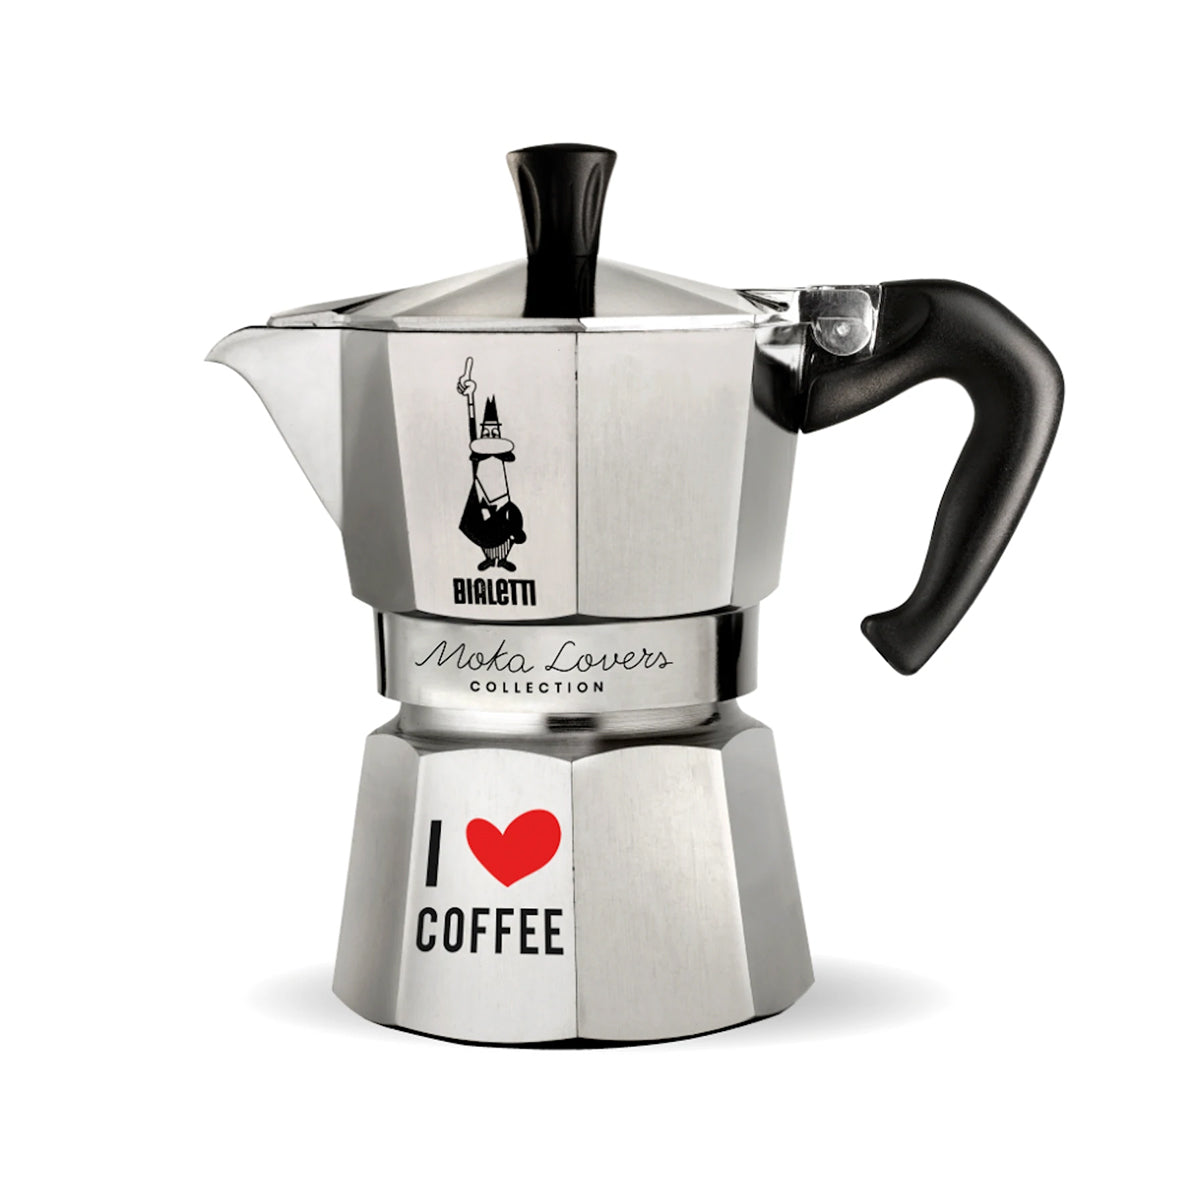 https://www.redberus.shop/wp-content/uploads/1692/43/visit-bialetti-moka-expresso-i-love-coffee-aluminium-stovetop-coffee-maker-6-cup-bialetti-to-find-more-visit-us-to-get-discounts_0.jpg